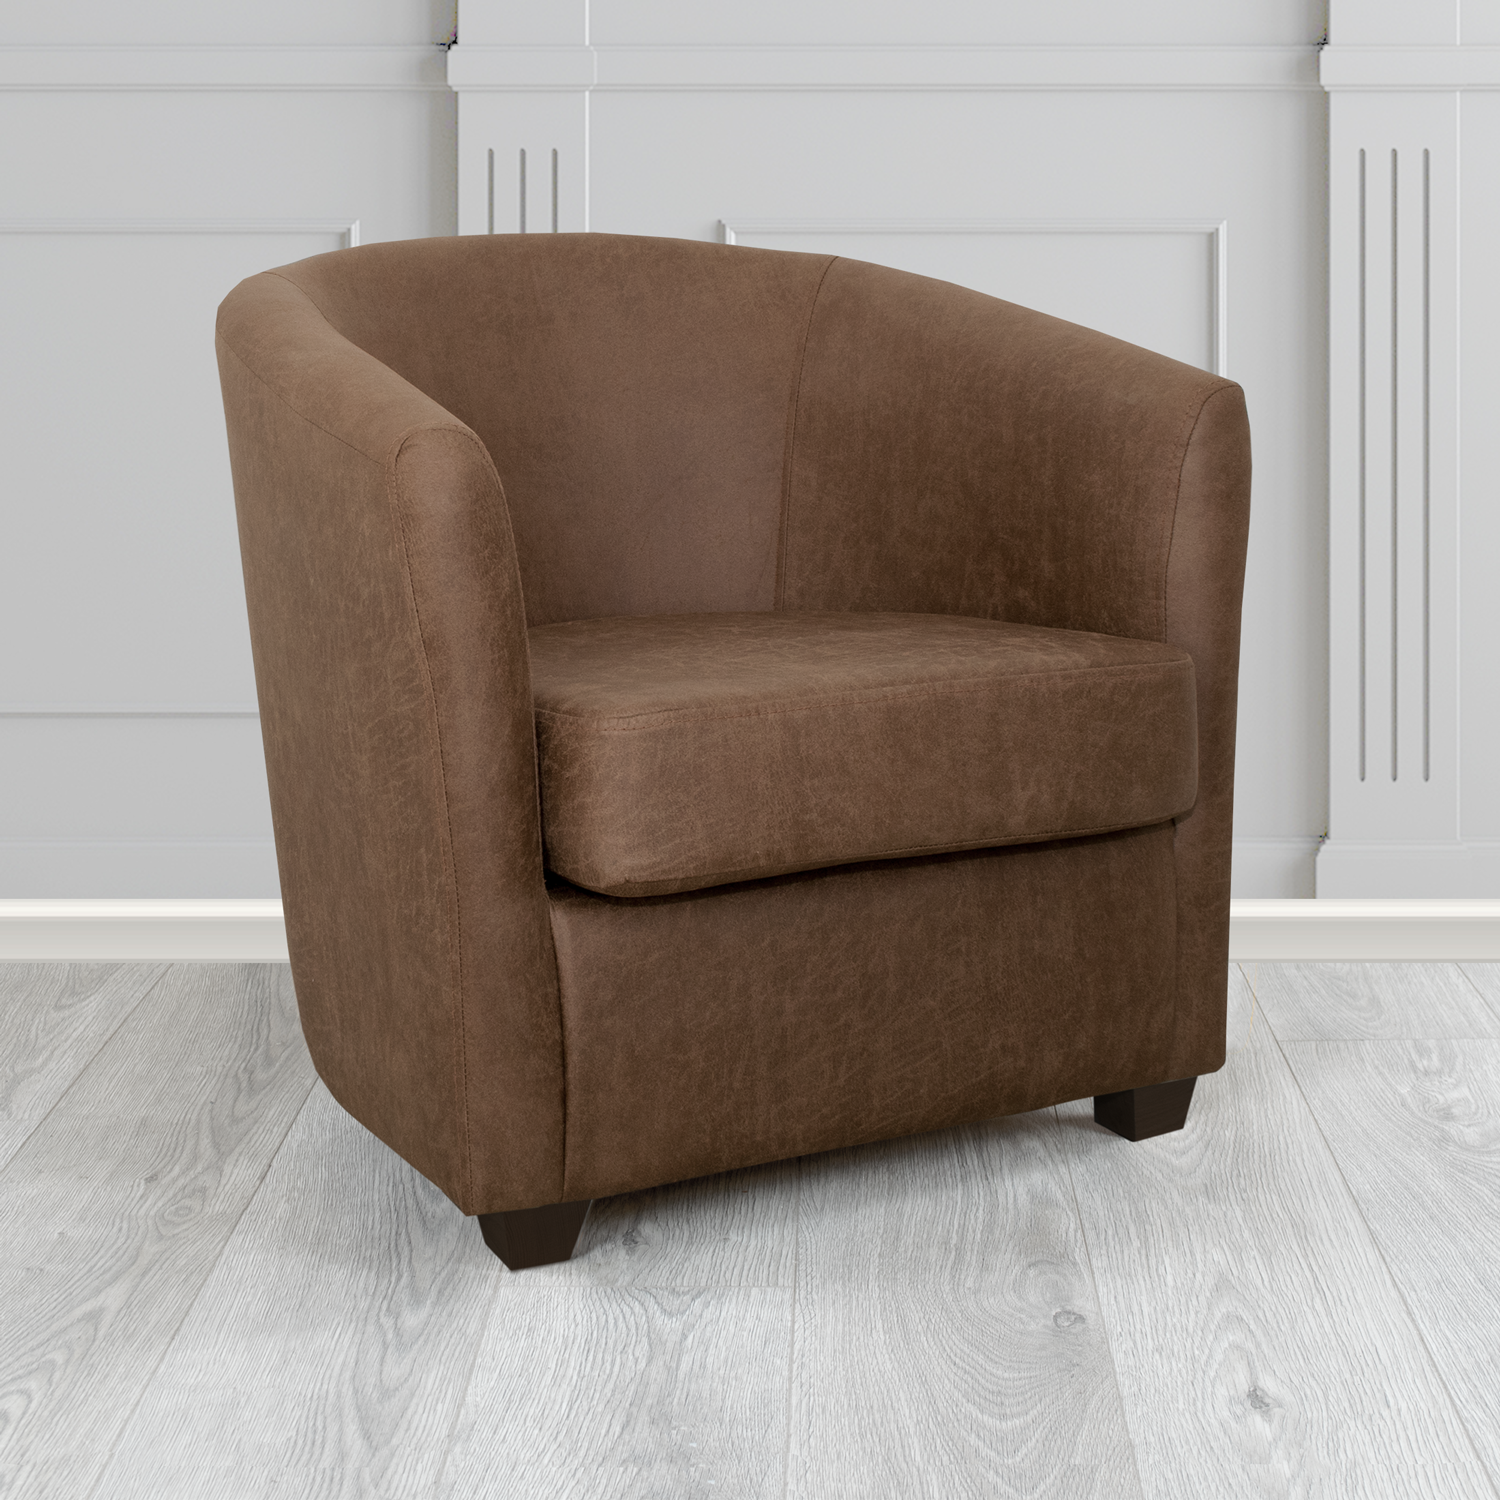 Cannes Tub Chair in Nevada Chocolate Faux Leather - The Tub Chair Shop